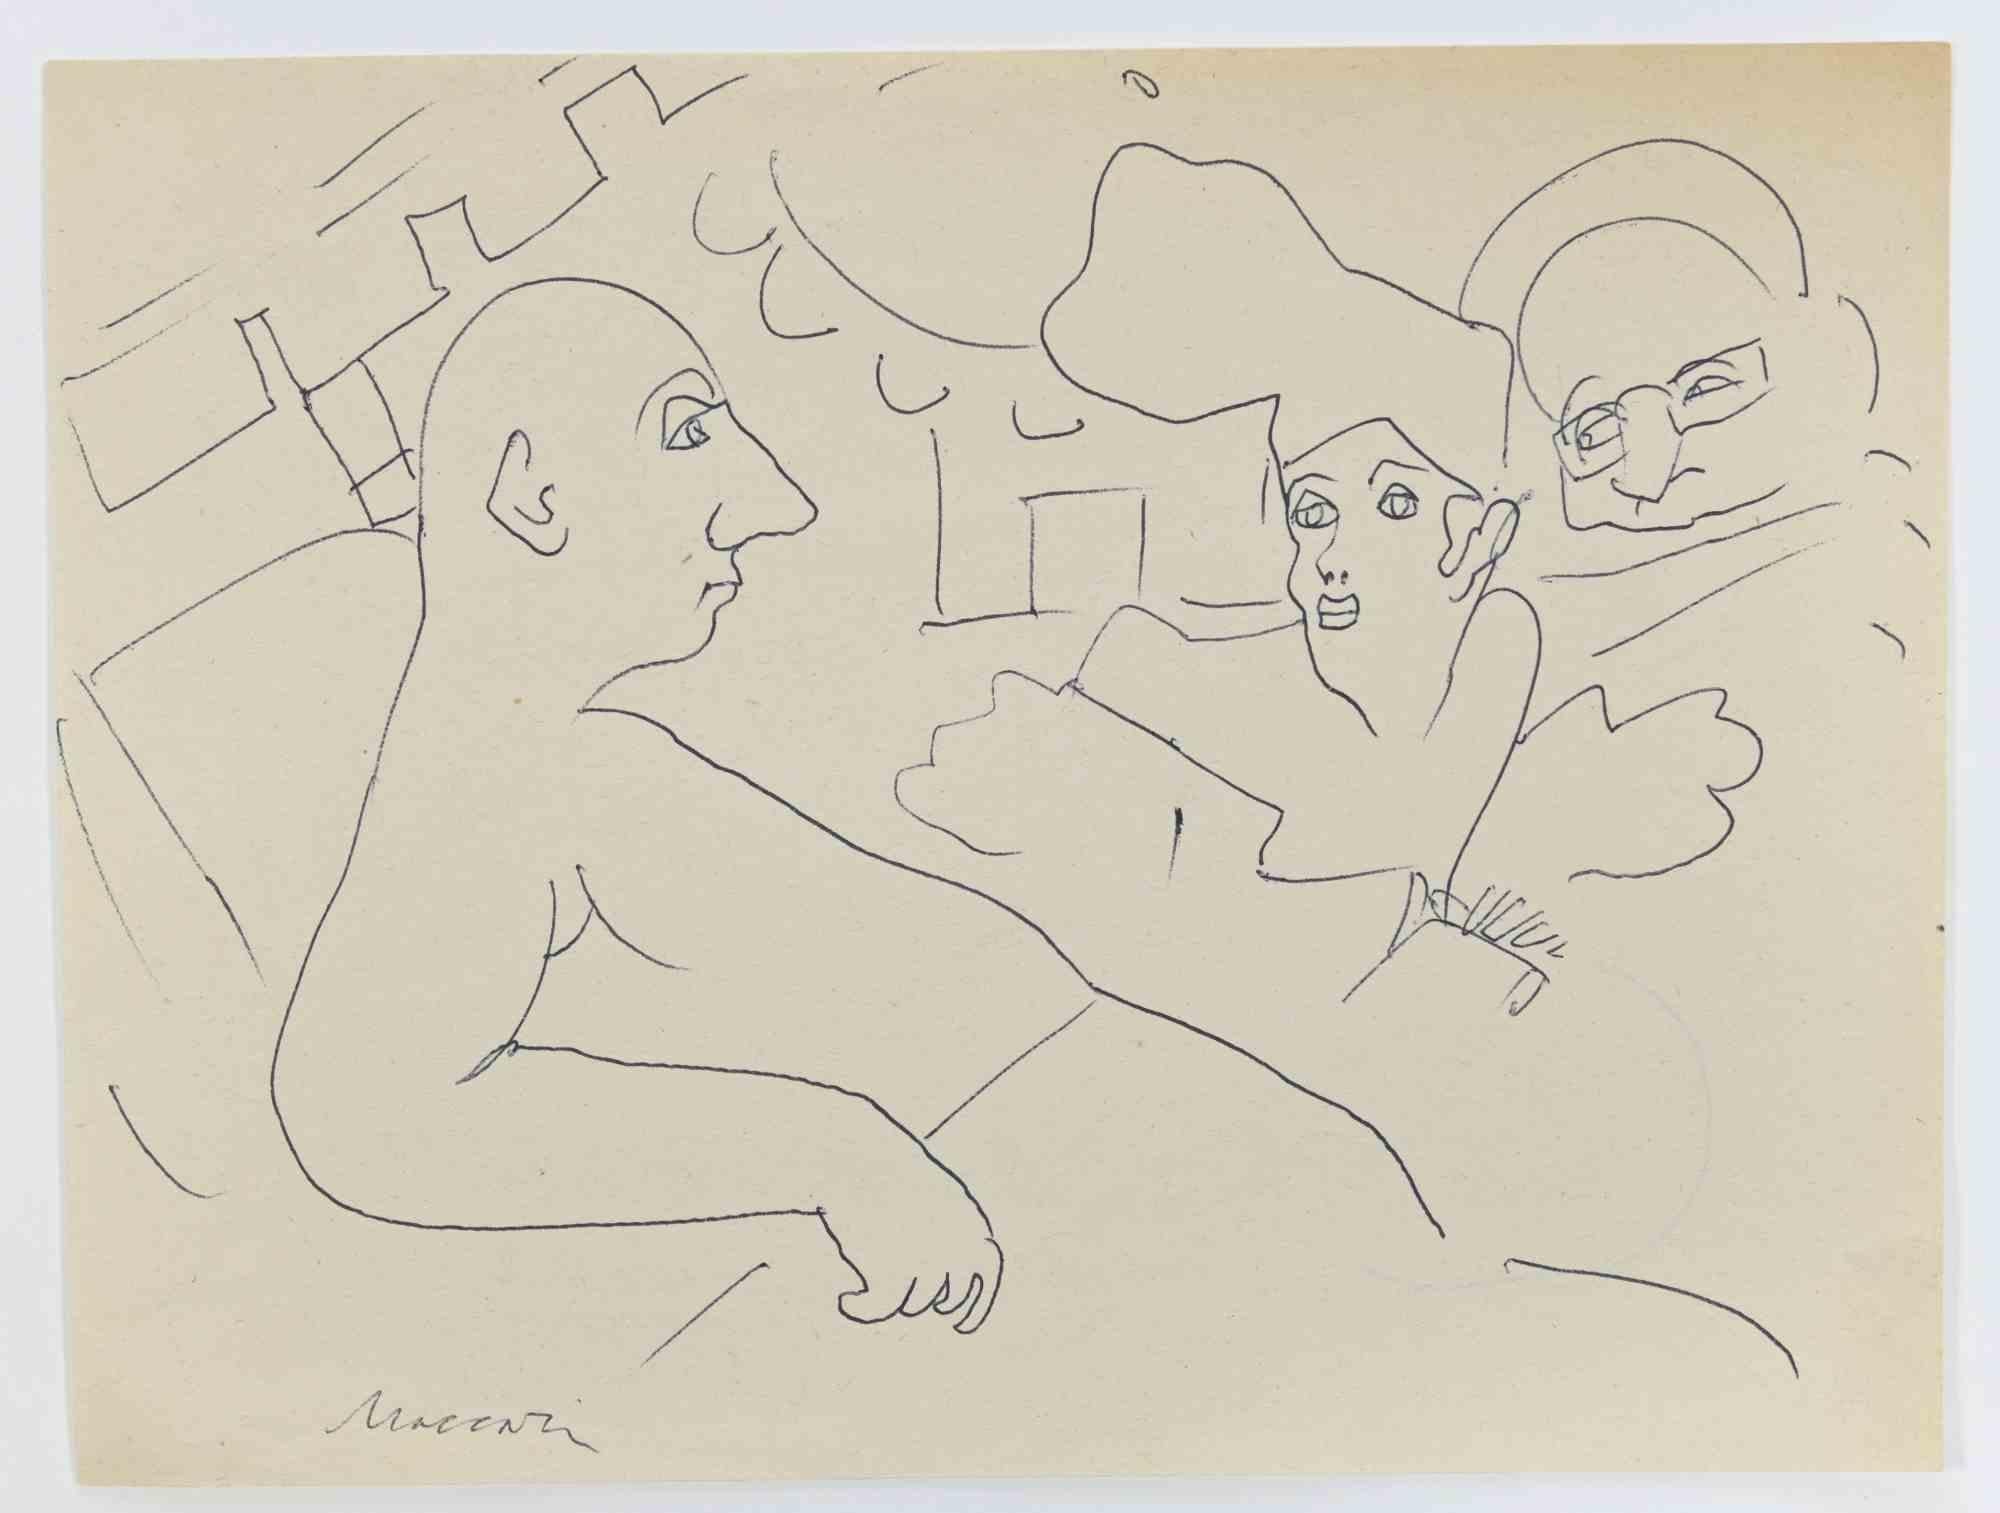 Lovers in the Bed is a Pen Drawing realized by Mino Maccari  (1924-1989) in 1960s.

Hand-signed on the lower margin.

Good condition.

Mino Maccari (Siena, 1924-Rome, June 16, 1989) was an Italian writer, painter, engraver and journalist, winner of